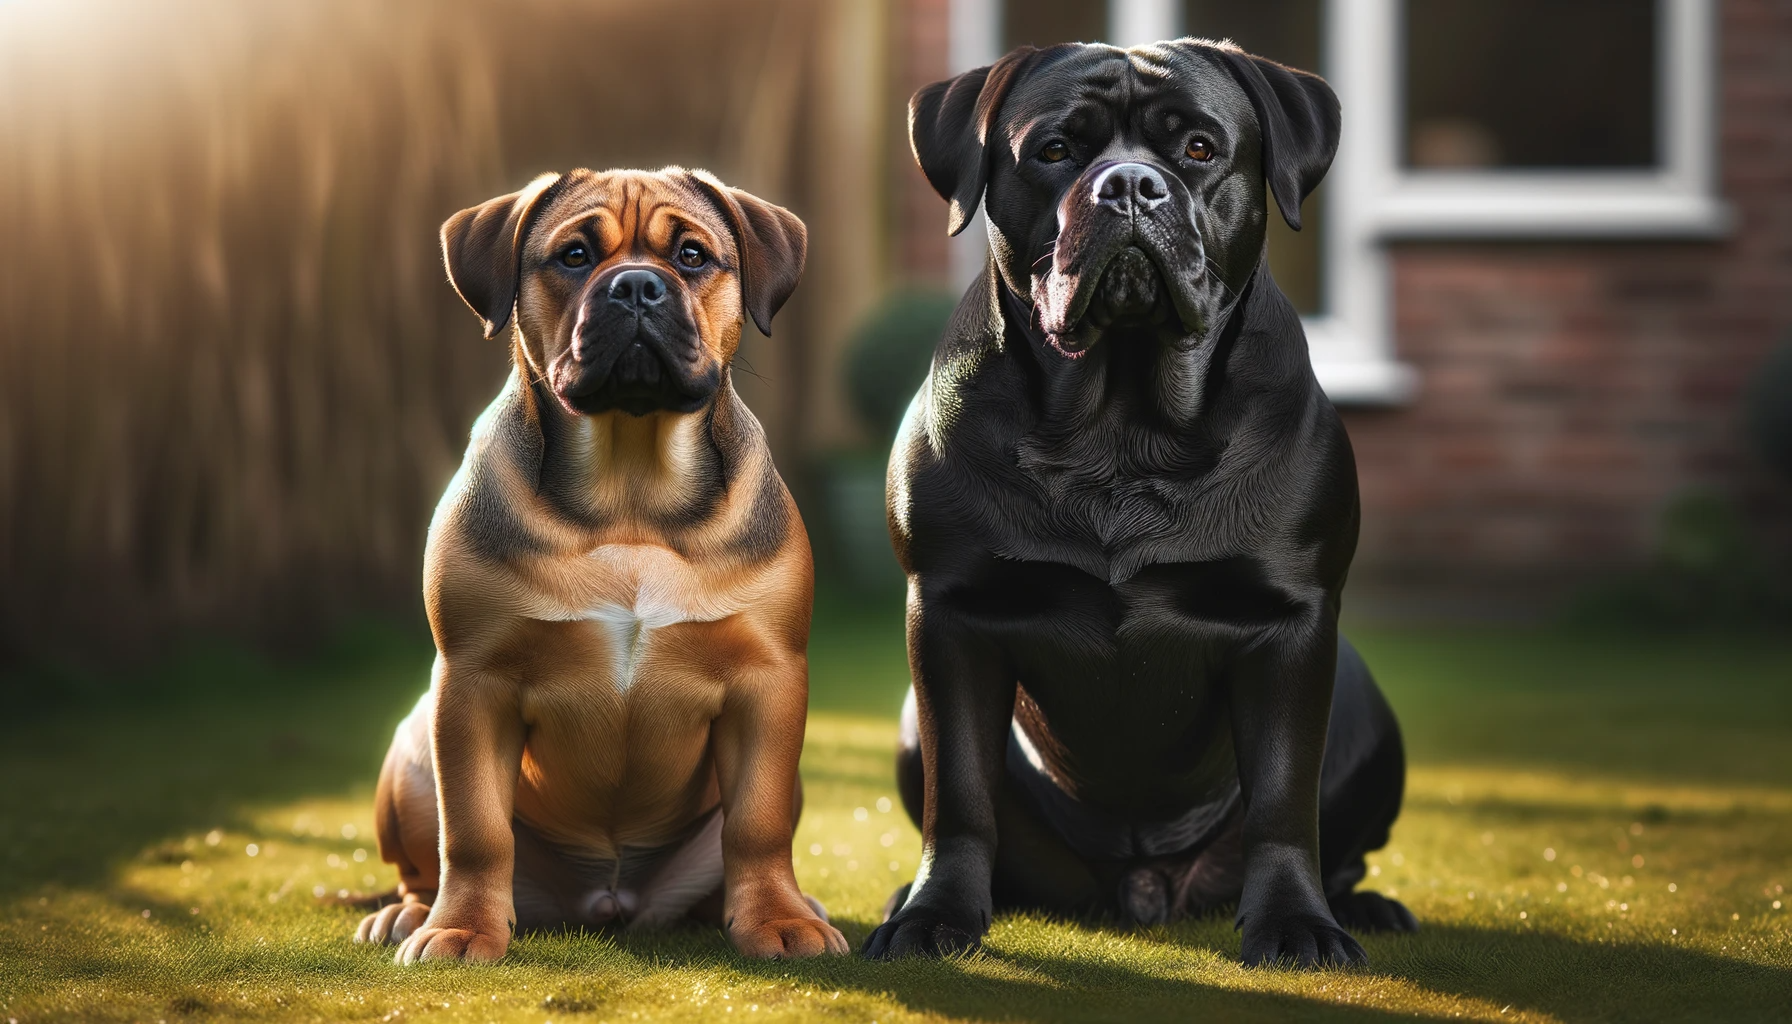 Photo of a male and female Bullador dog sitting side by side on a grassy patch. The male is slightly larger with a robust frame, while the female, although smaller, has a confident and dominant posture. The sun highlights their glossy coats, and their expressions suggest a playful power dynamic between them.